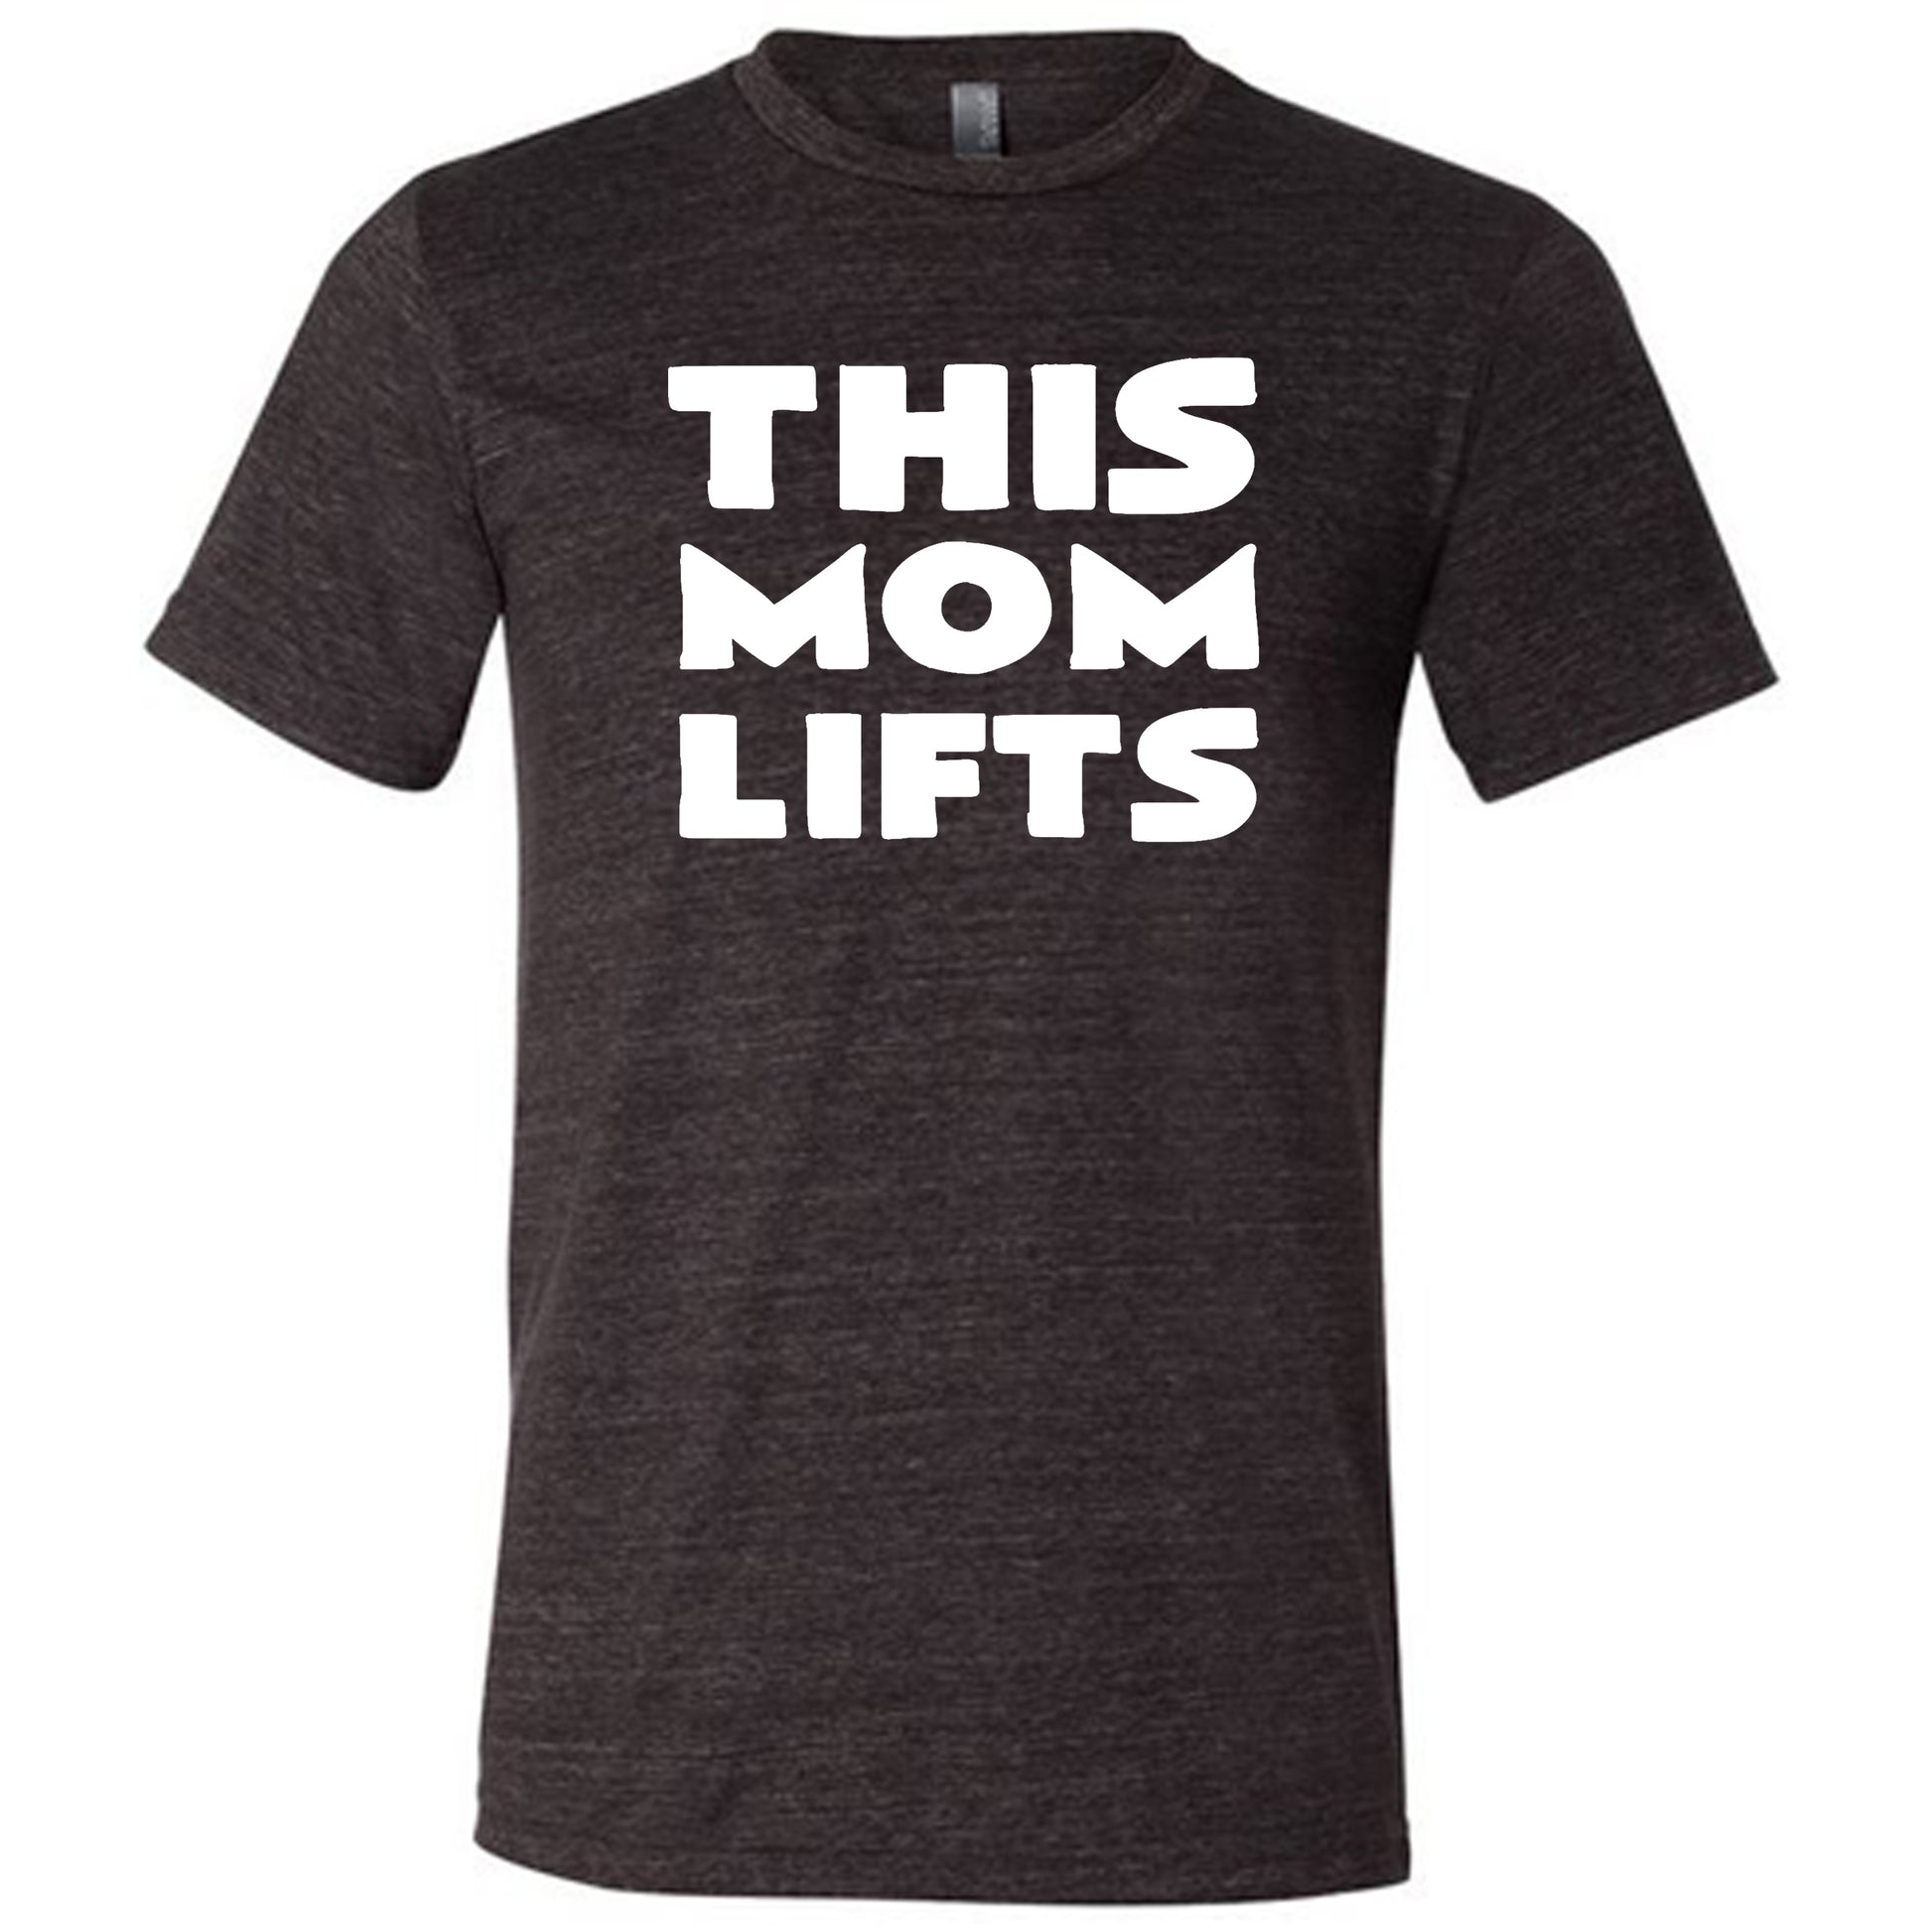 black unisex tee shirt with the saying "this mom lifts" in the center in white lettering